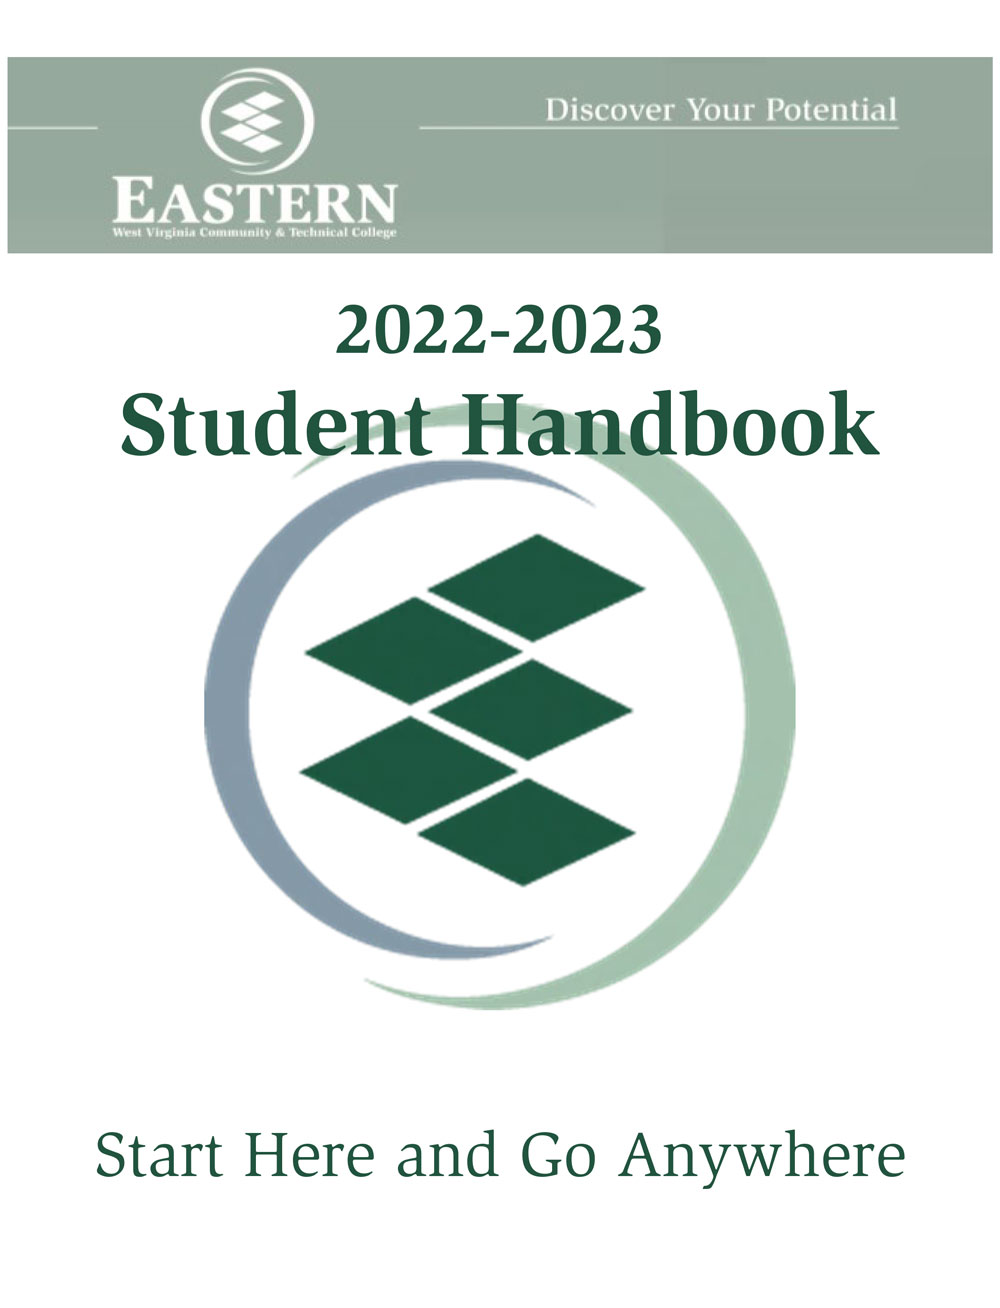 Cover image of the 2022-23 Student Handbook at Eastern.